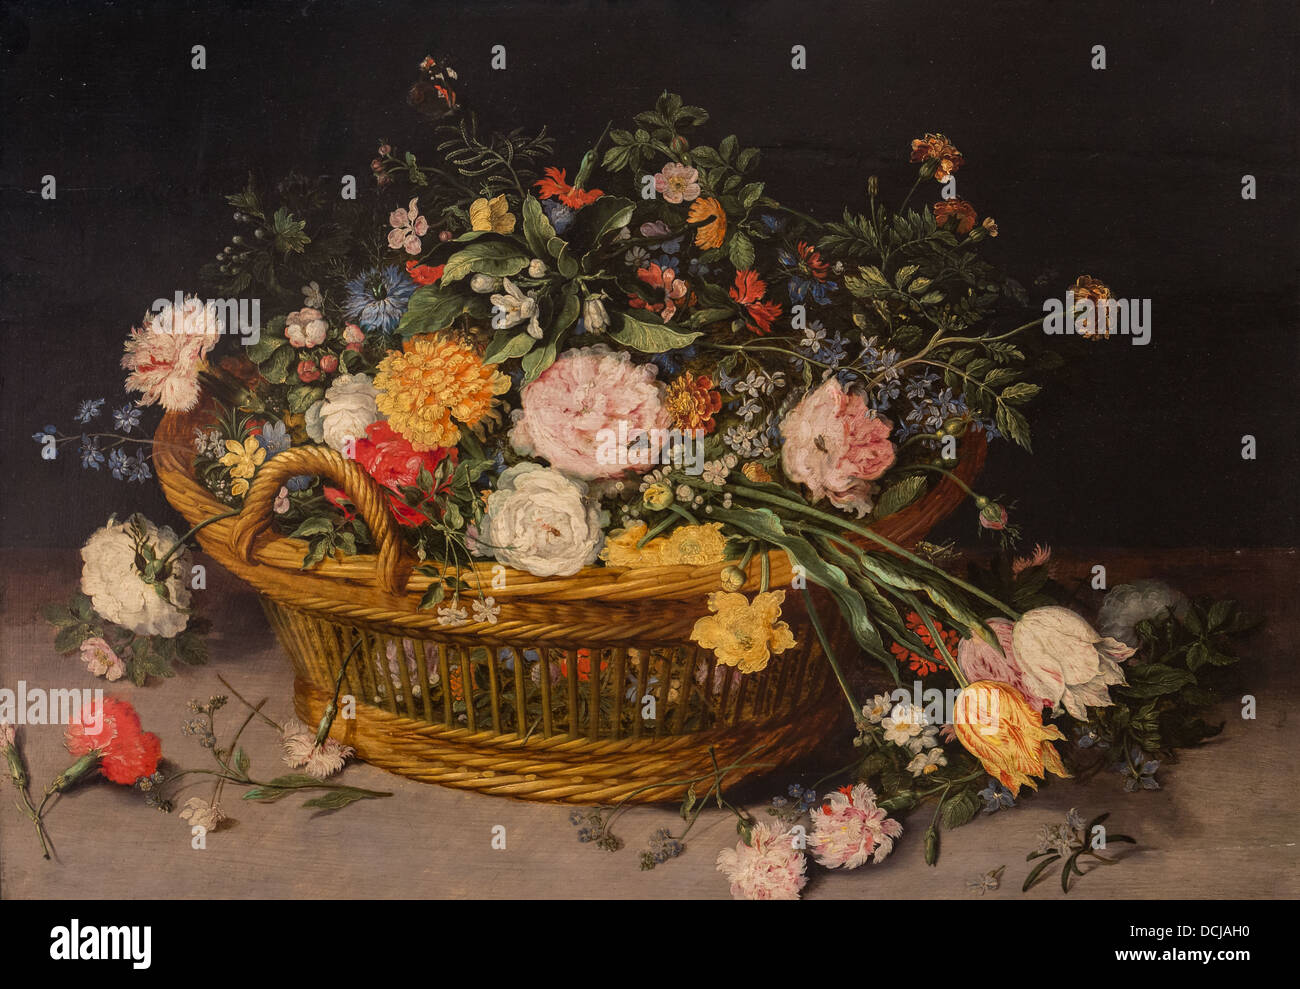 17th century  -  A Basket of Flowers - Jan Brueghel the Younger (1620) - Metropolitan Museum of Art - New York Oil on canvas Stock Photo